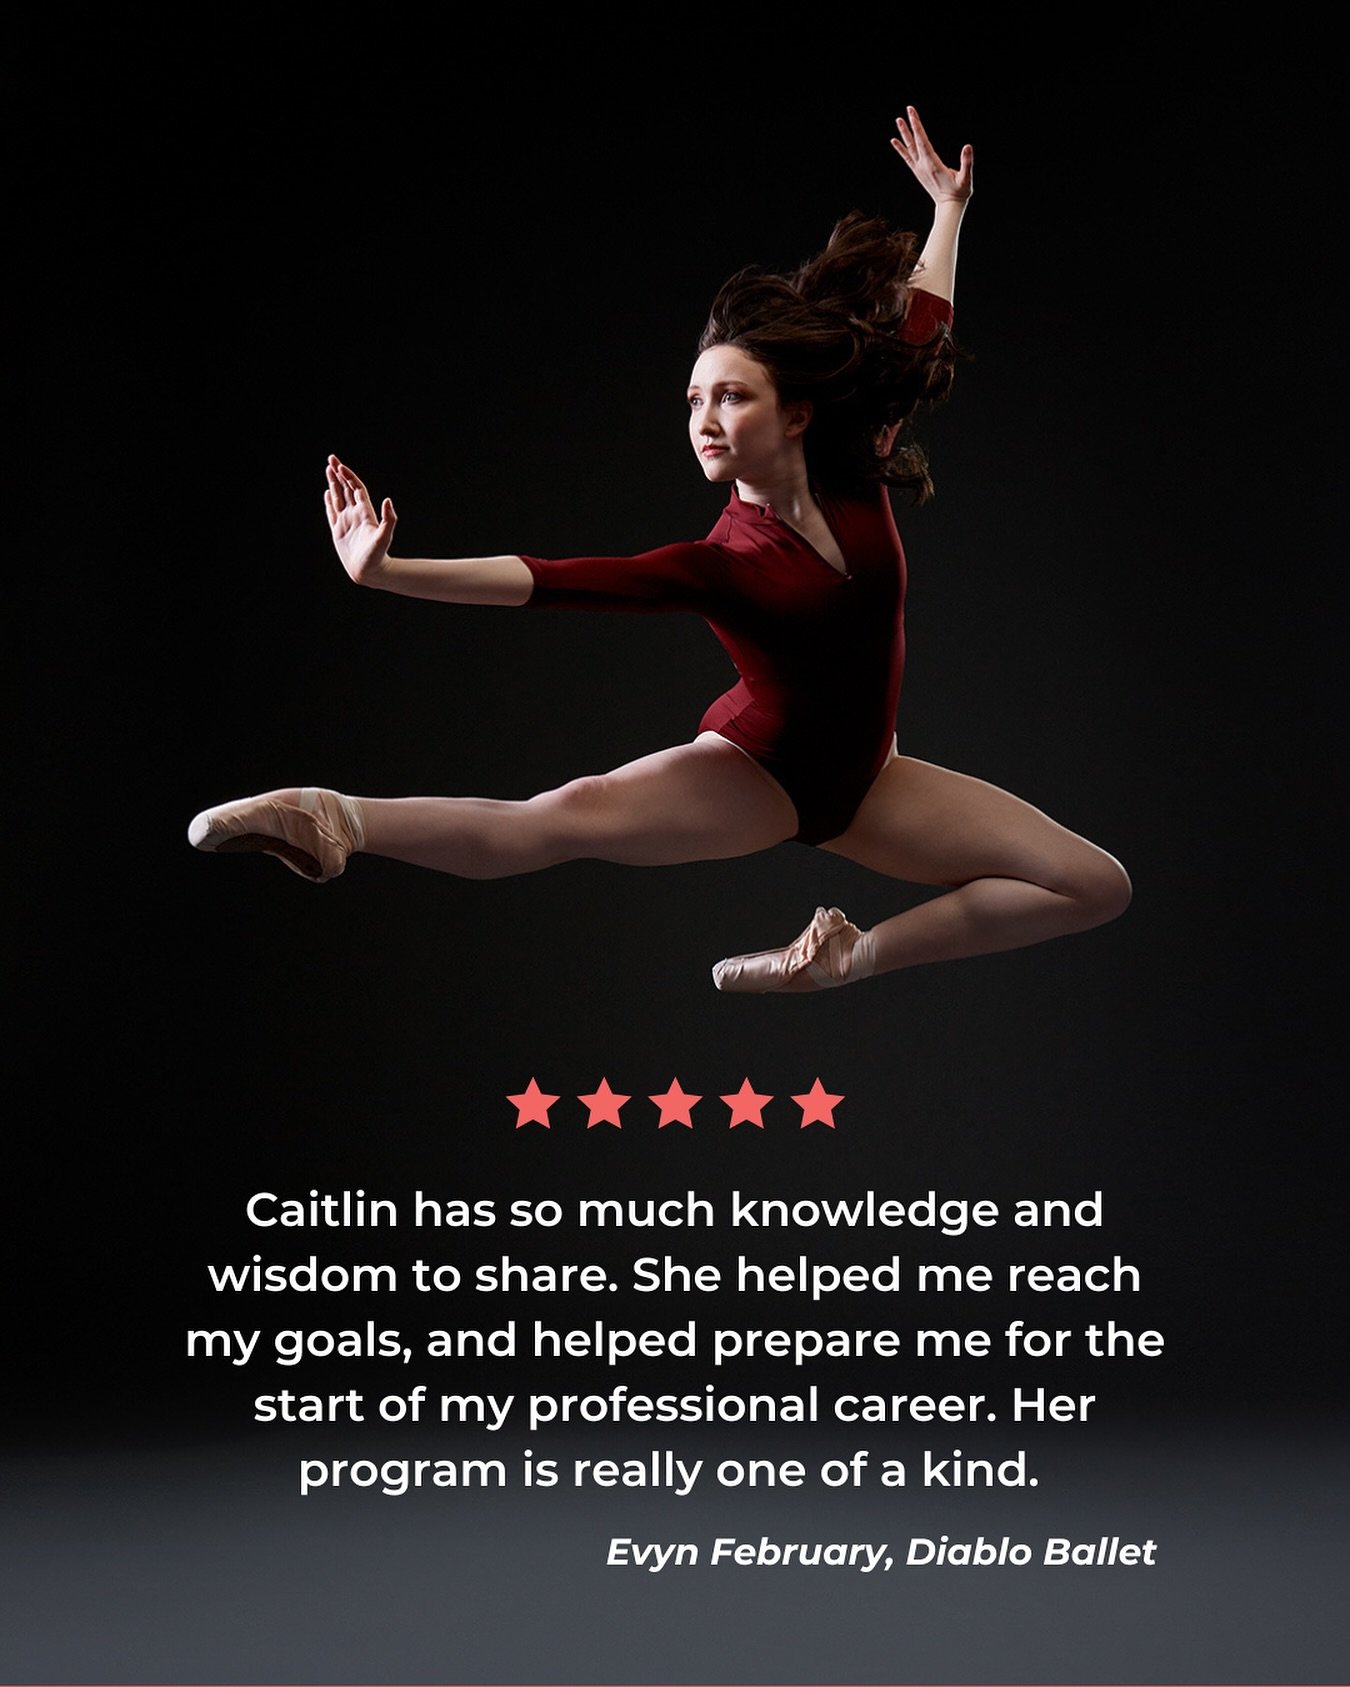 CLIENT TESTIMONIAL ✨

Working with @evynfebuary has been nothing short of a dream. I am the lucky one!!

Looking for support to reach your dance career goals?

TAP the link in bio and schedule your complimentary career call!

📸: @rachelnevillestudio